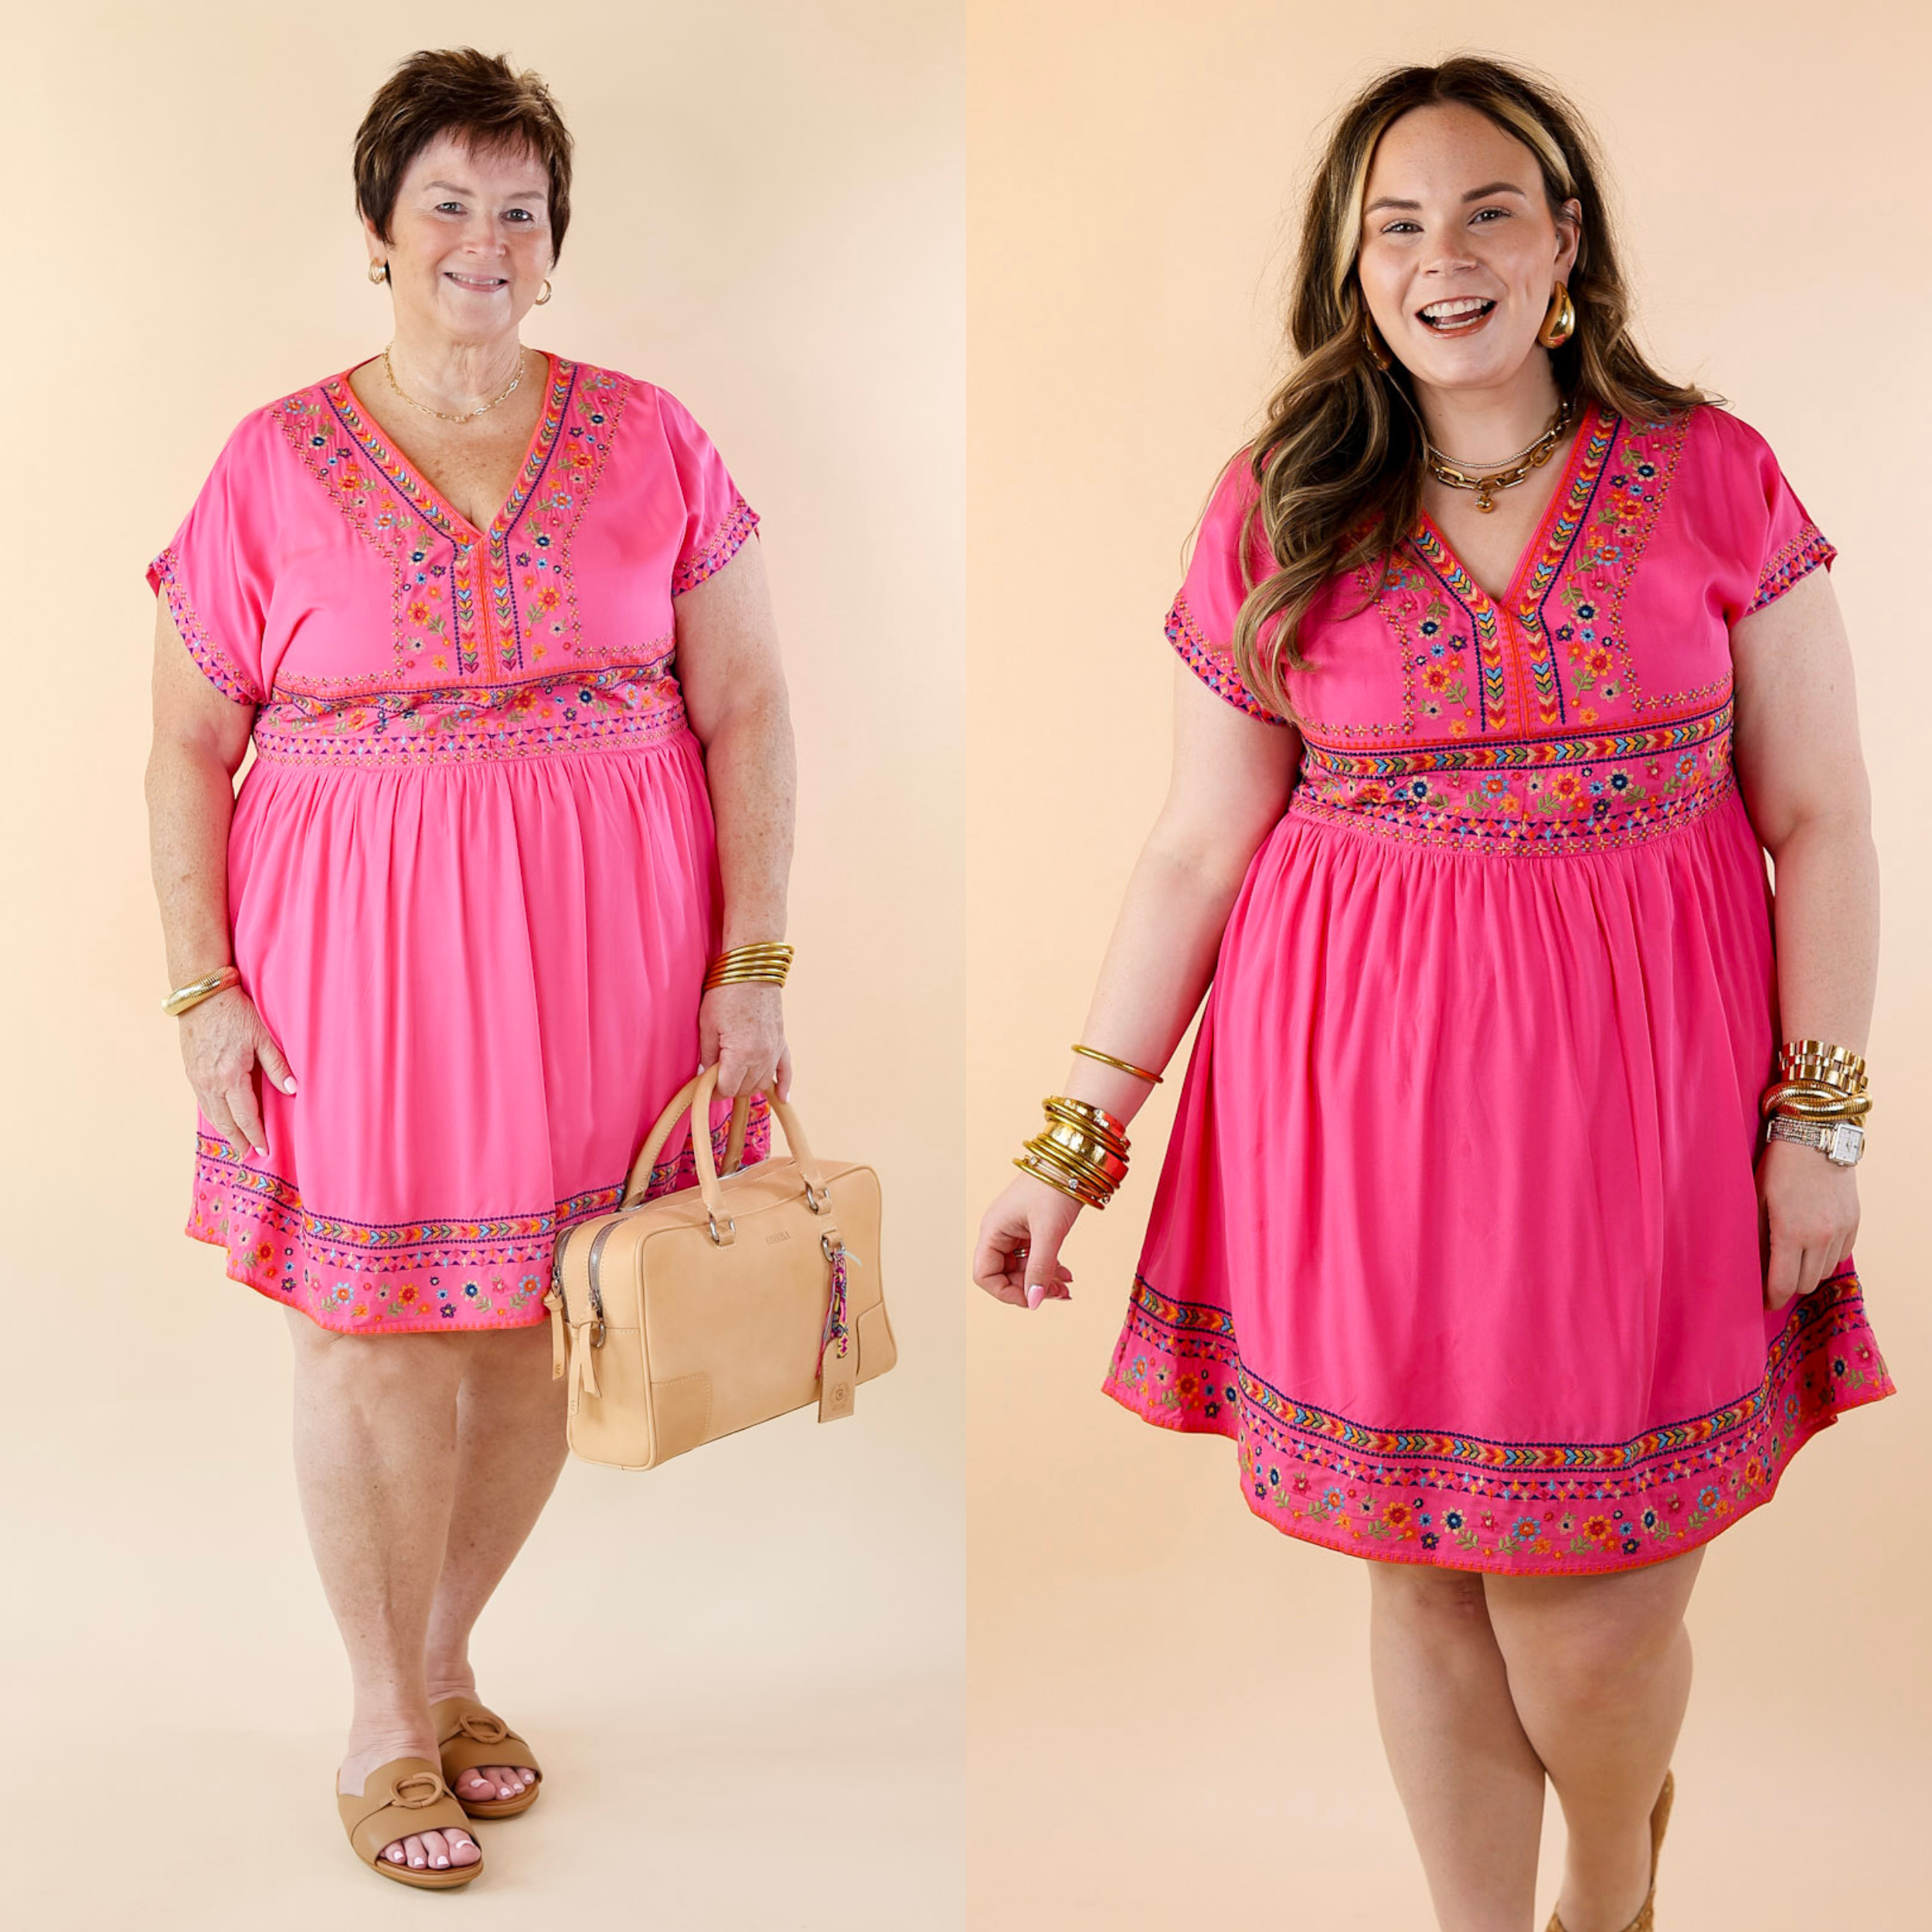 Passing Through V Neck Embroidered Dress with Short Sleeves in Pink - Giddy Up Glamour Boutique